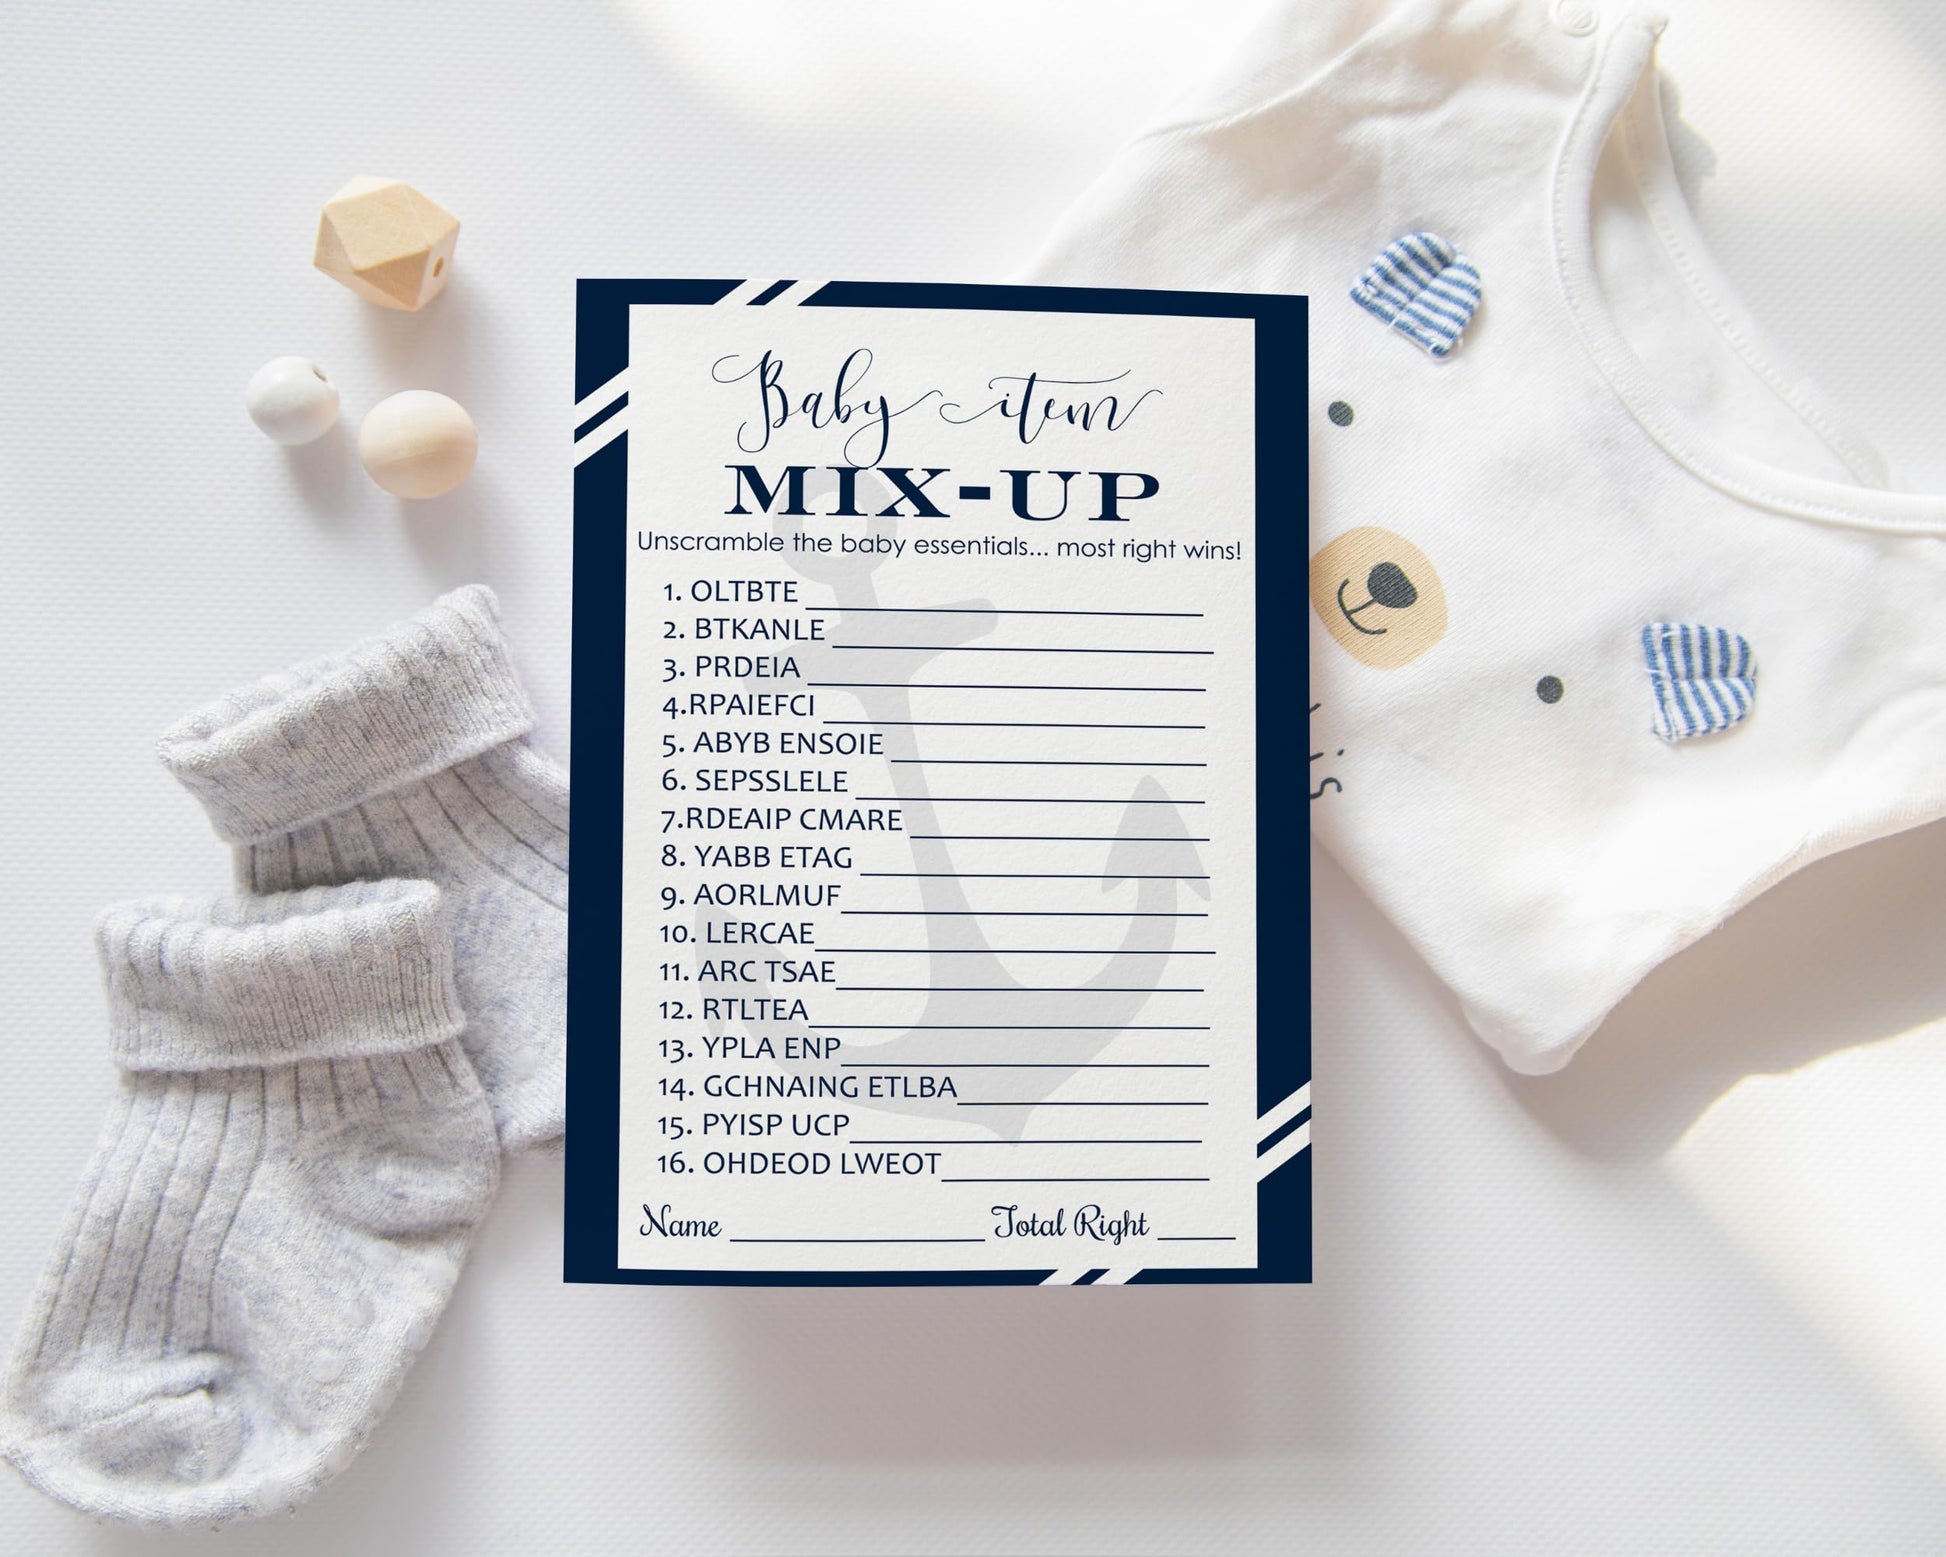 Nautical Baby Shower Word Scramble Game Cards (25 Pack) Unscramble Activity Cards - Ahoy Boys Baby Shower Game Set - Anchor Event Supplies Navy Blue Grey - Printed 4x6 SizePaper Clever Party